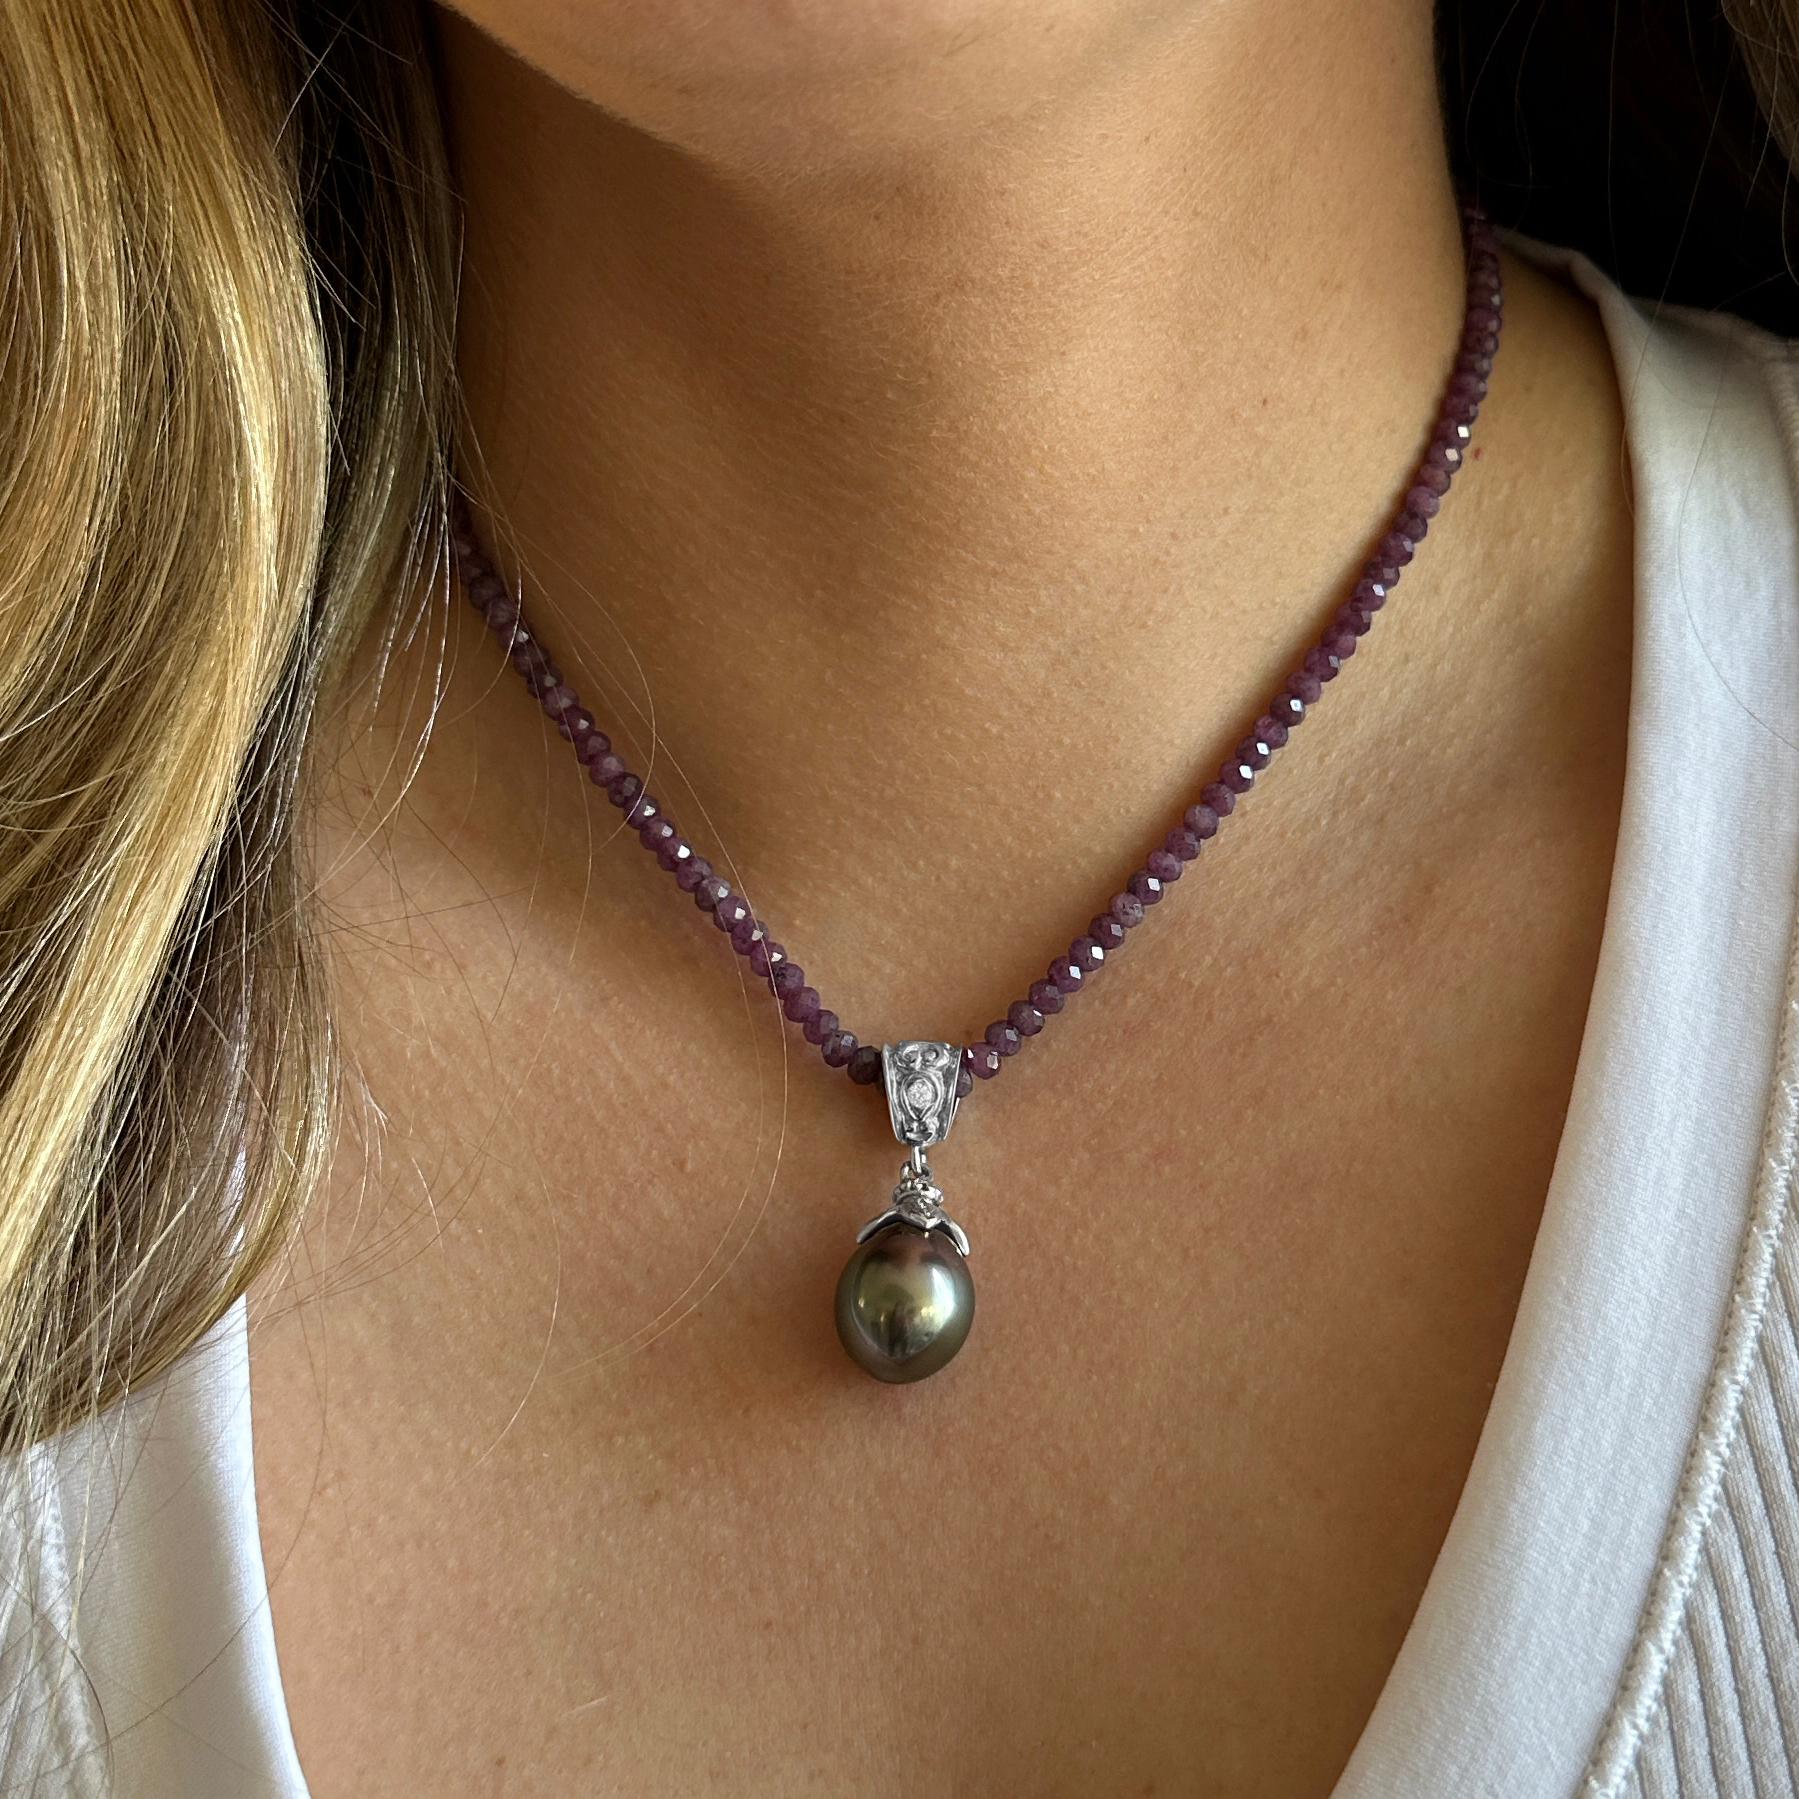 One of our favorite designs -- Eytan Brandes' gorgeous two-part  slider pendant -- is now presented in 18 karat white gold and paired with a gorgeous, silky Tahitian pearl.

The pearl is from George Hajjar, owner of Seven Seas Pearls, based in Los